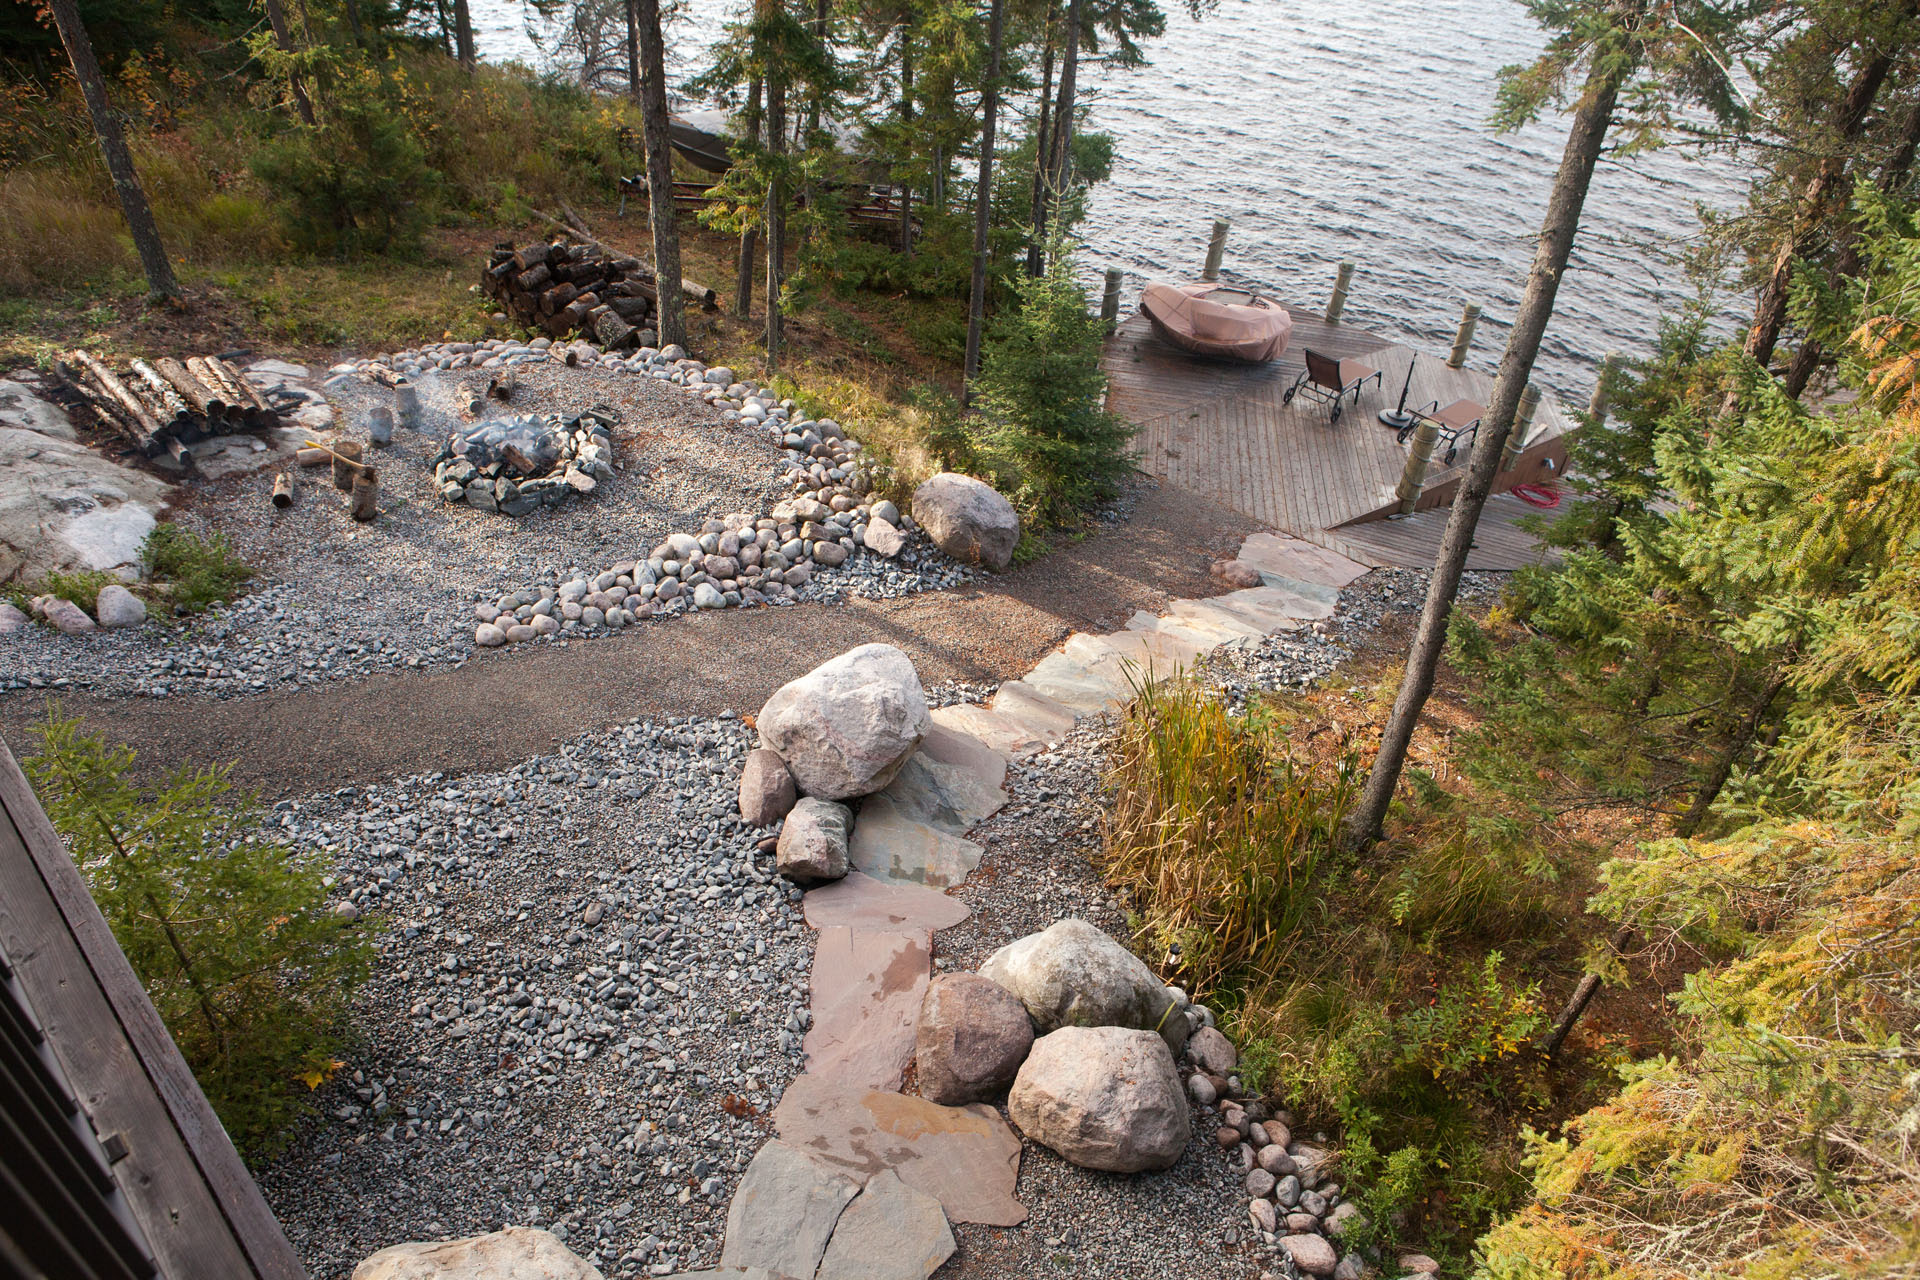 Landscaped gravel and rock pathway for a cabin, overlooking a dock and water.